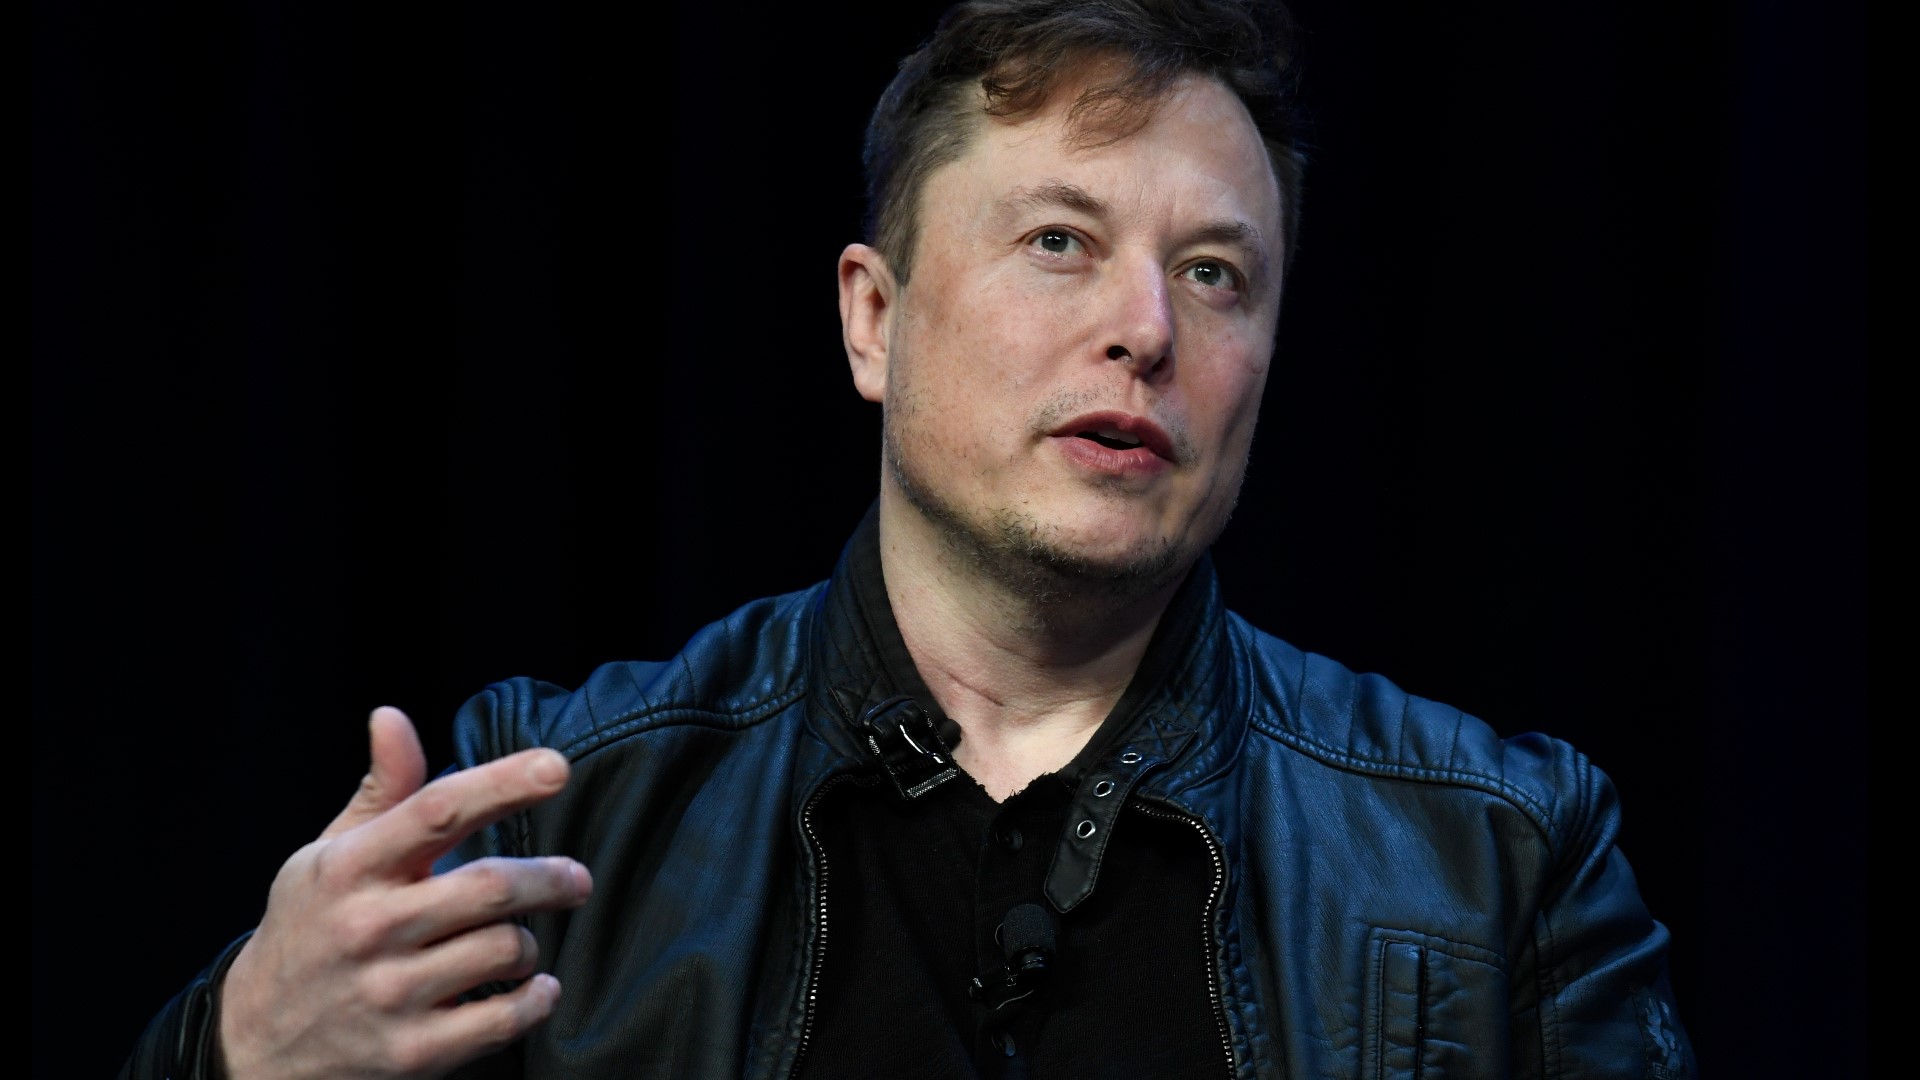 Getting rich quick sounds great, but most times it turns out to be a scam. A new scam involves Elon Musk, as scammers take advantage of their victims.